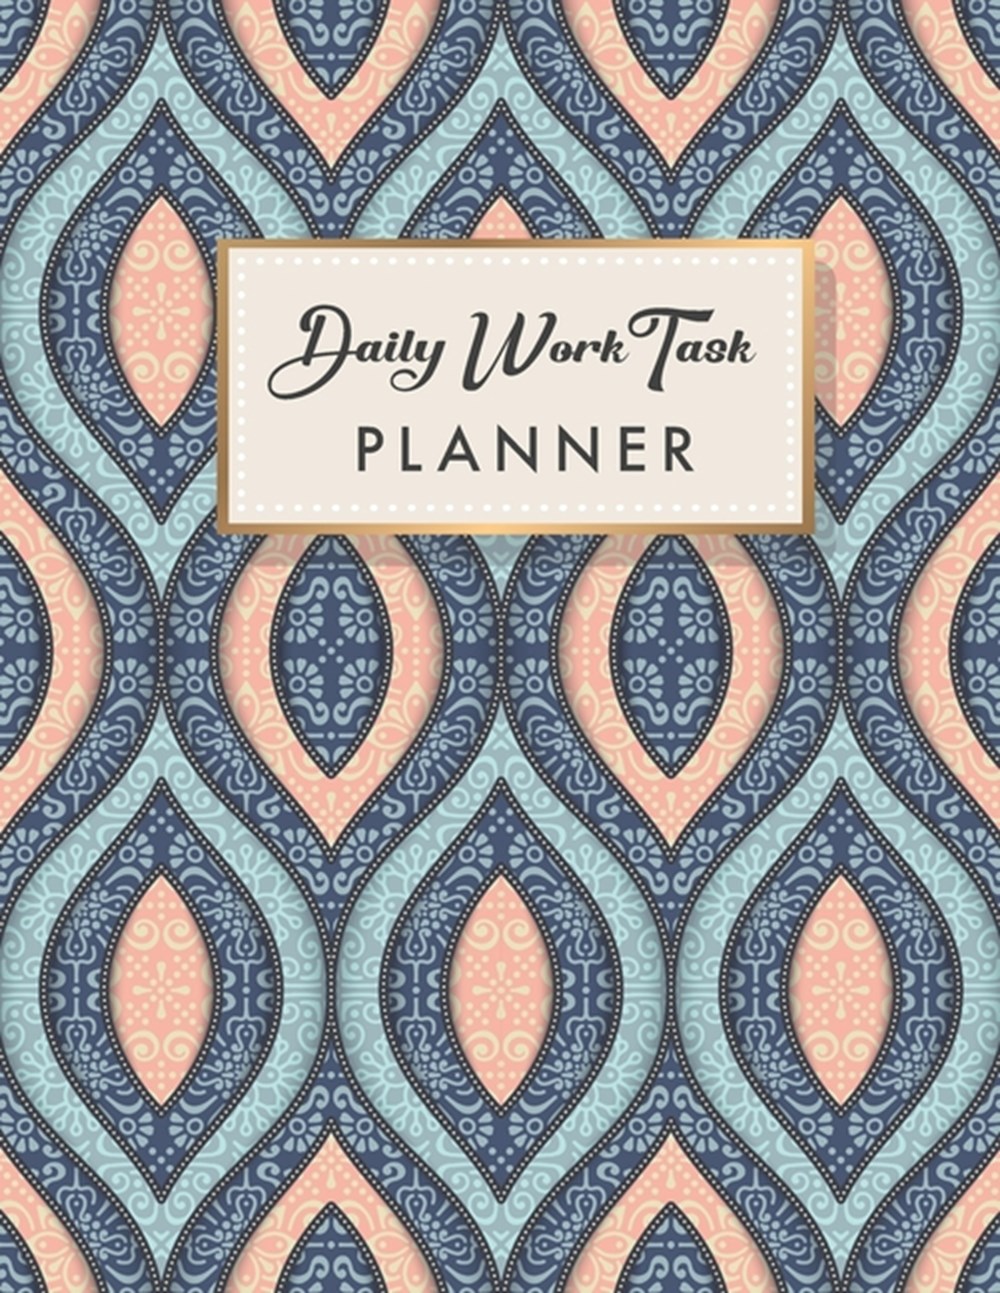 Daily Work Task Planner To-Do List Daily Organizer Task Management Planner Undated - Hourly Work Day